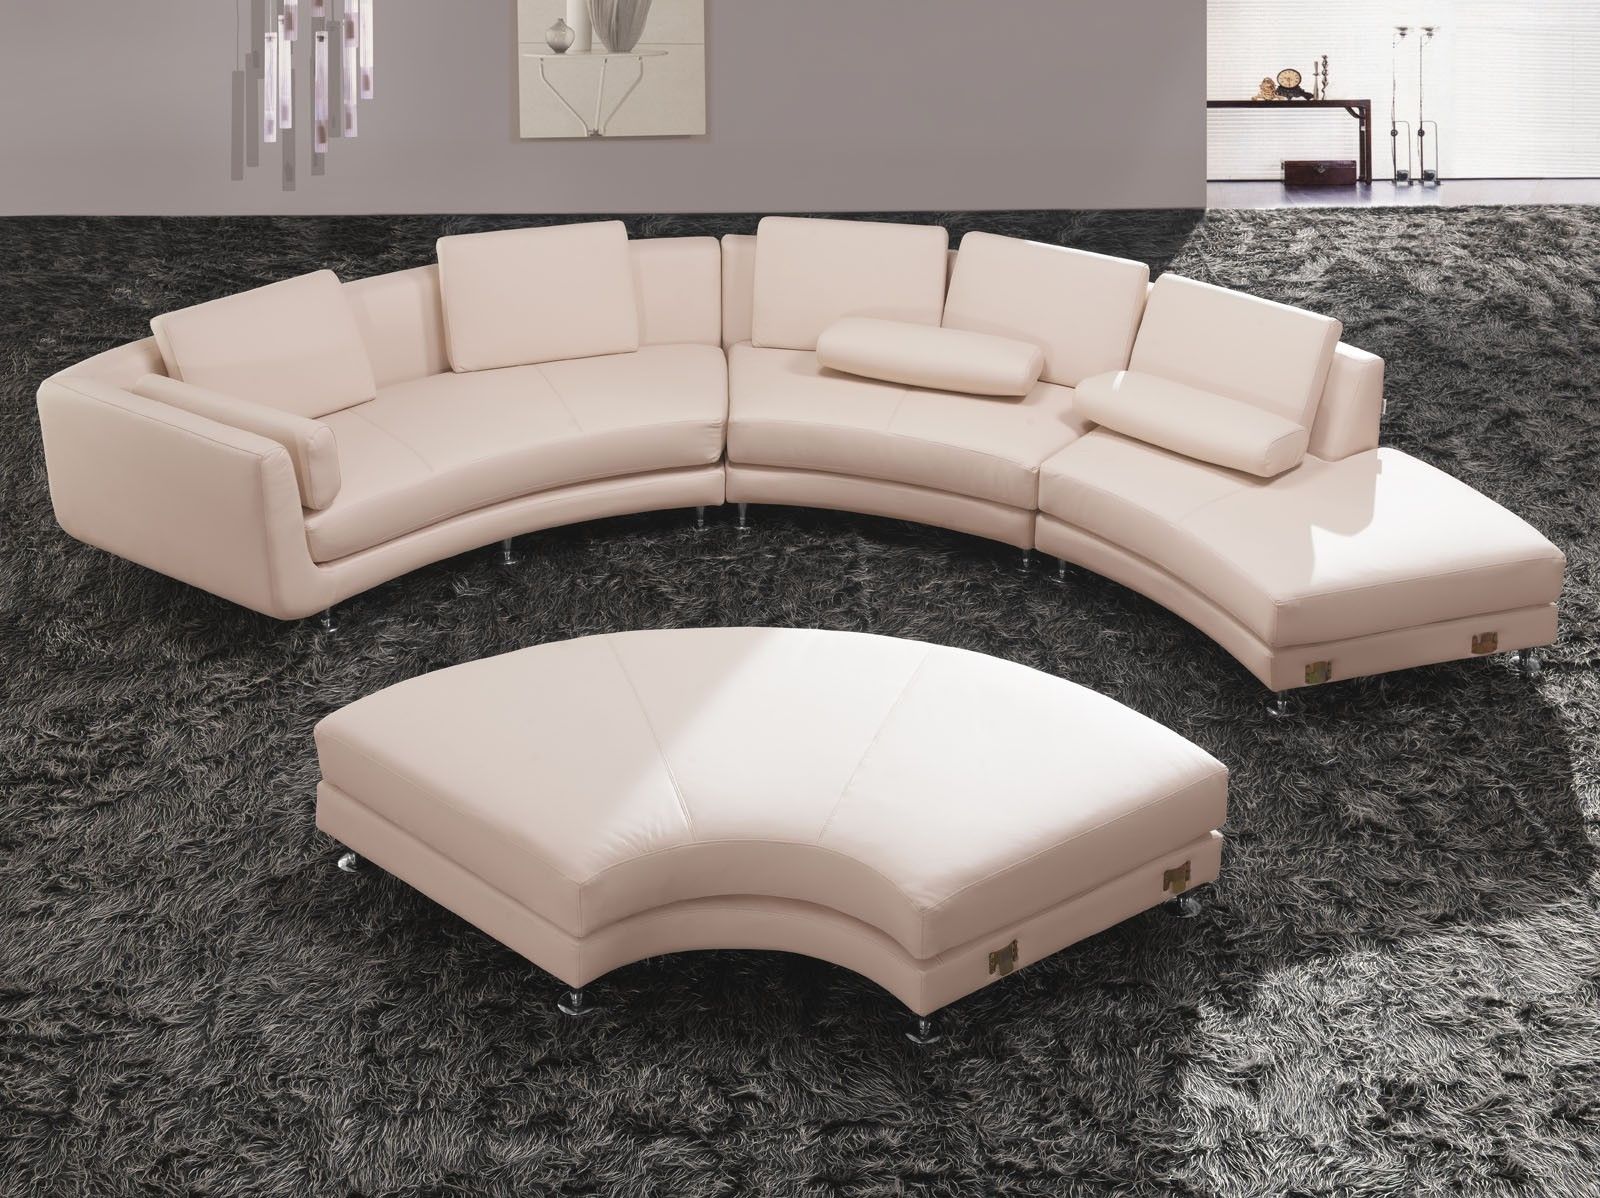 Sofas Center Circle Sectional Sofa Stirring Photo Concept Round Intended For Circle Sectional Sofa (View 9 of 12)